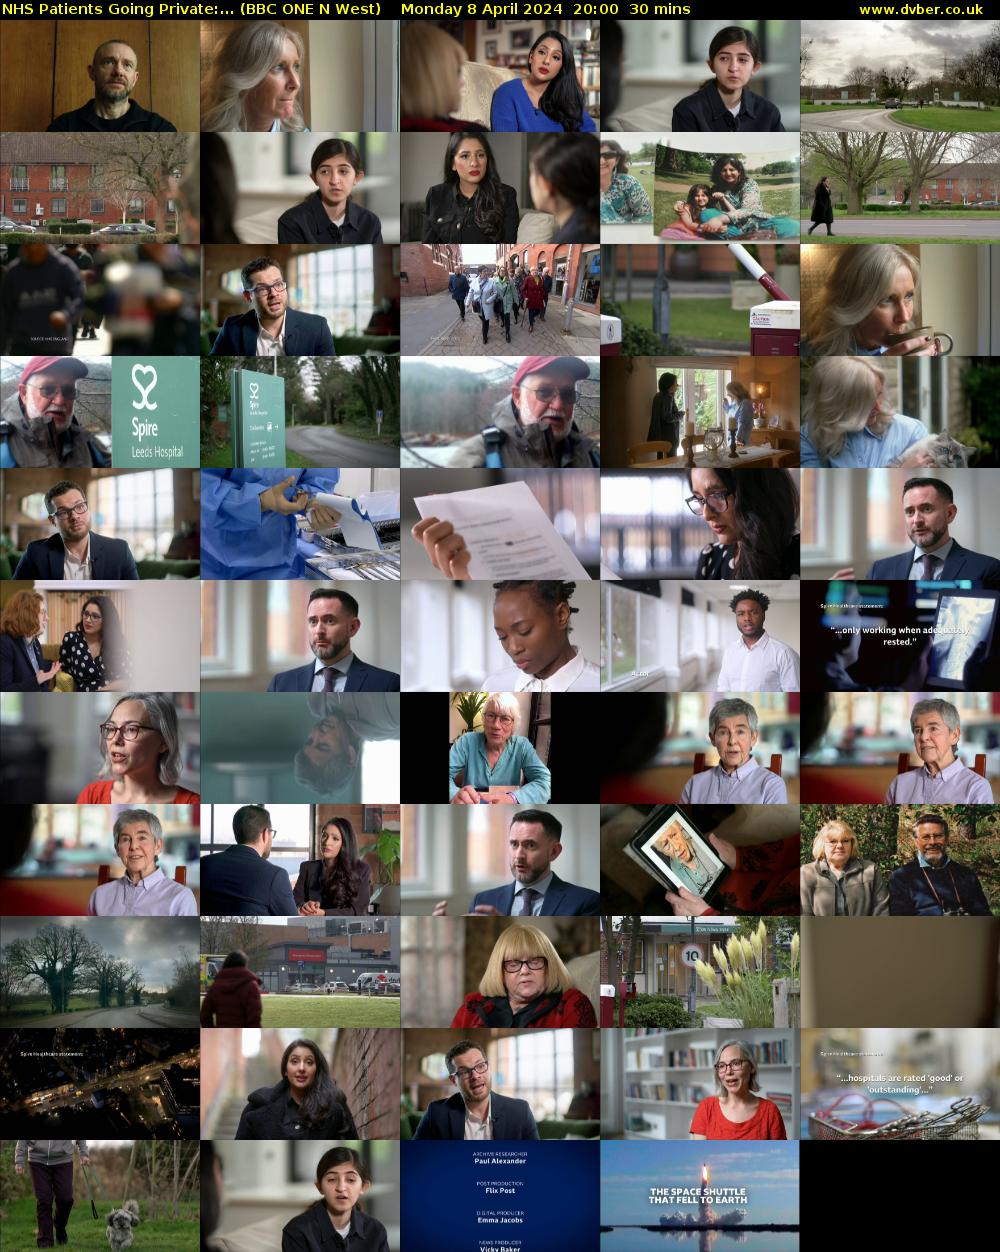 NHS Patients Going Private:... (BBC ONE N West) Monday 8 April 2024 20:00 - 20:30